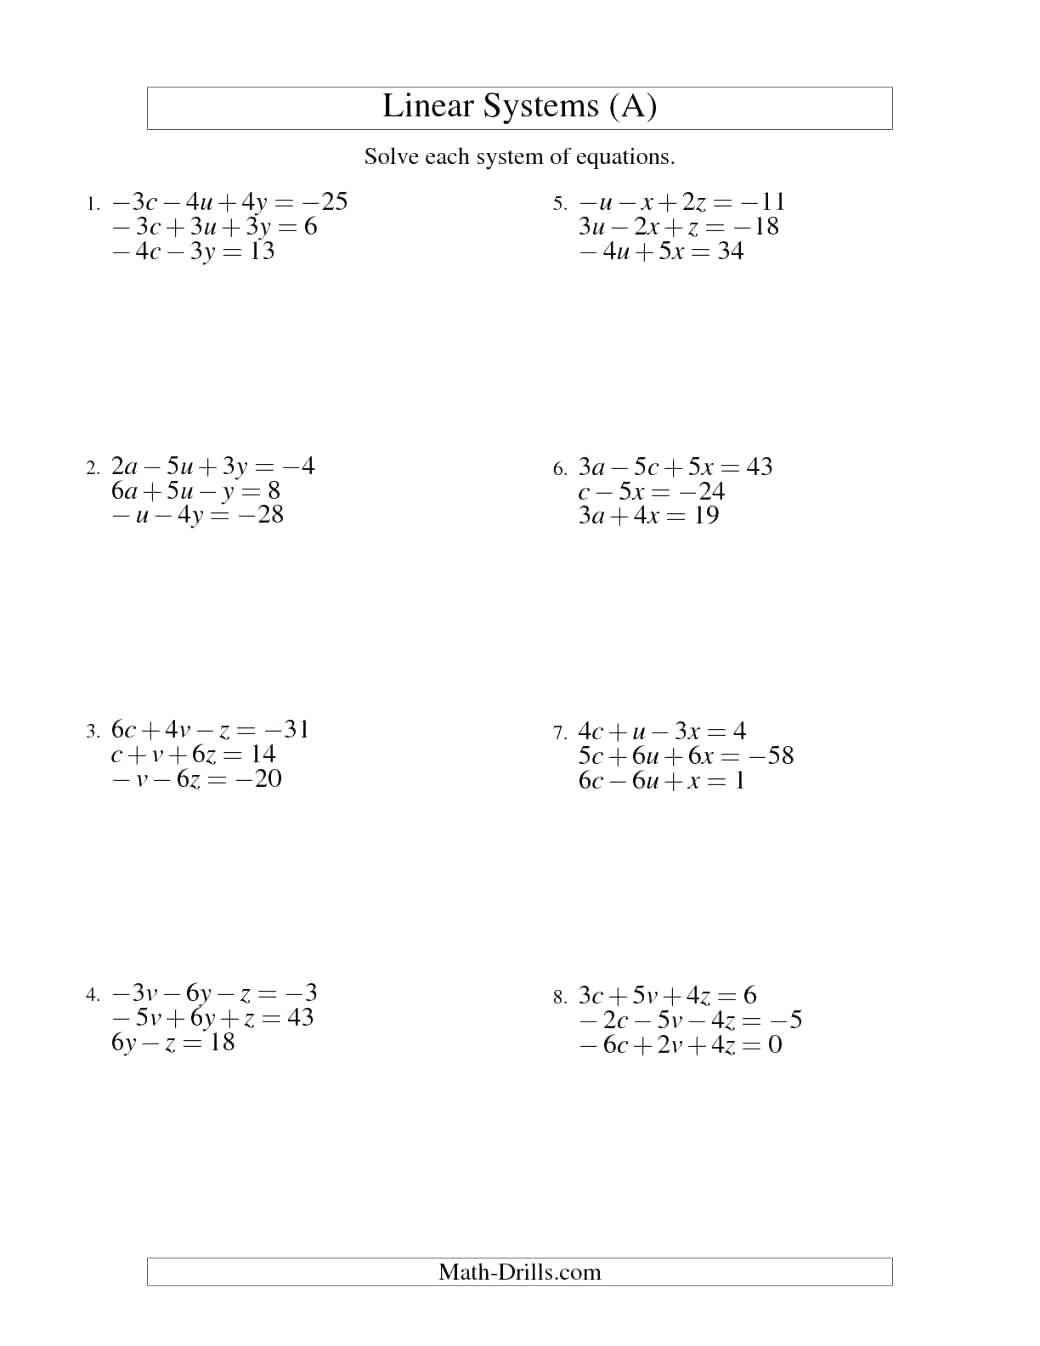 Nidecmege Systems Of Equations Word Problems Worksheet Algebra 2 For Systems Of Linear Equations Word Problems Worksheet Answers